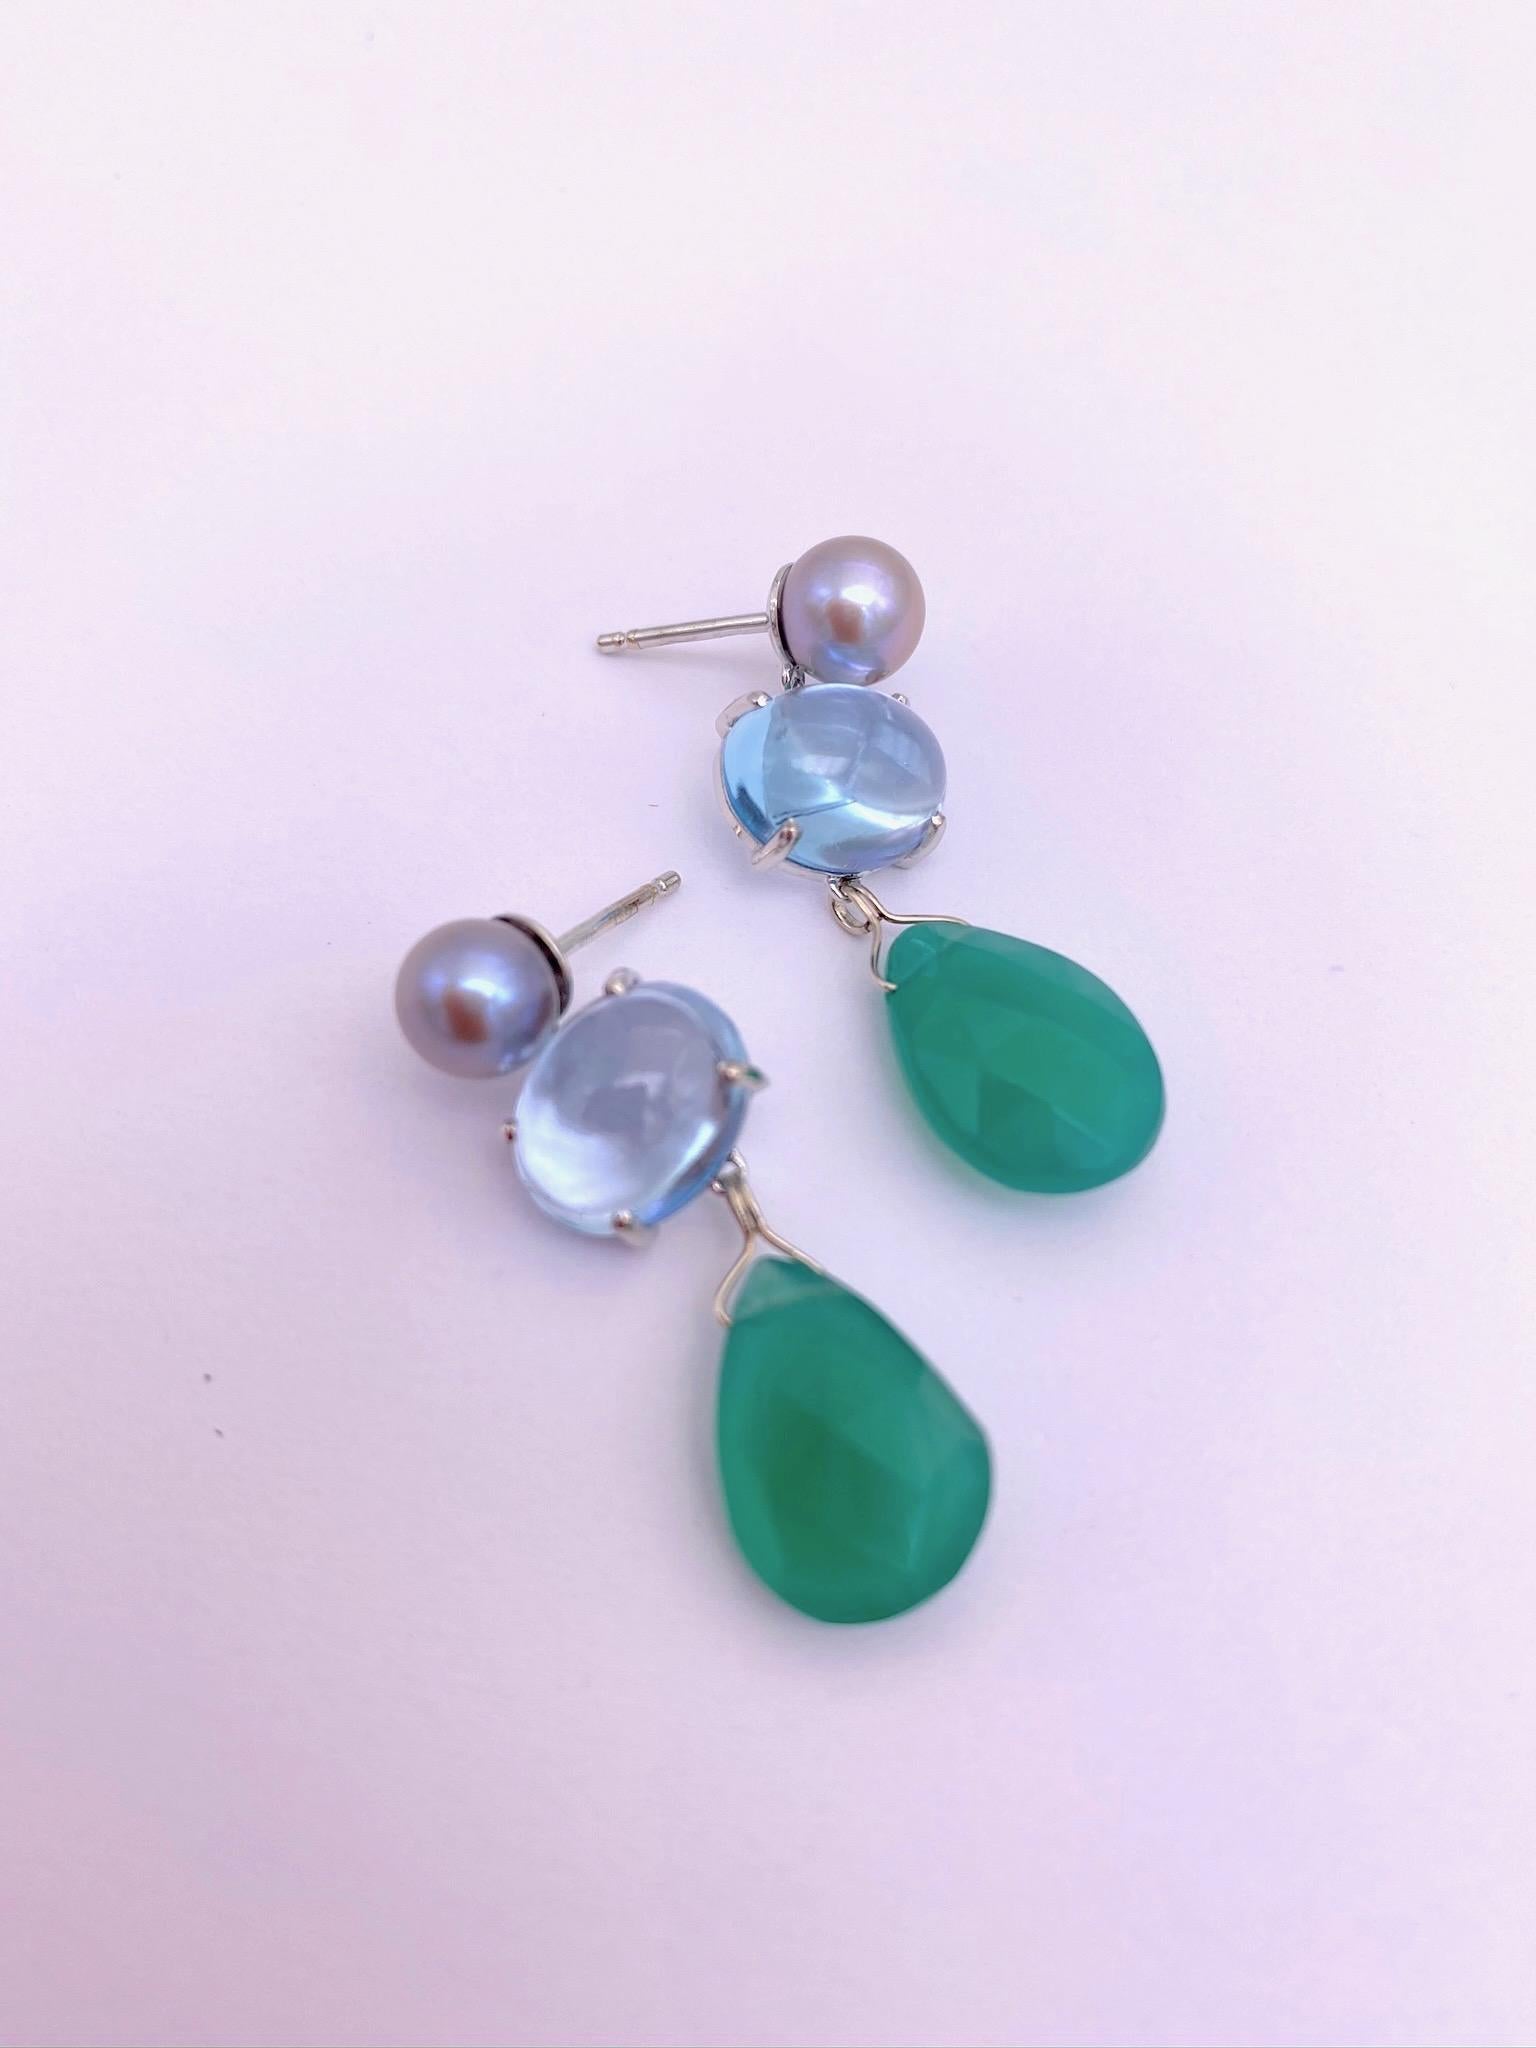 Rossella Ugolini Design Collection, a beautiful shade of light blue and green made in 18 Karat White Gold Light Blue Topaz Green Agate.
These contemporary Design earrings are handcrafted in 18 Karats Yellow Gold  easy wear.
Simple and elegant with a